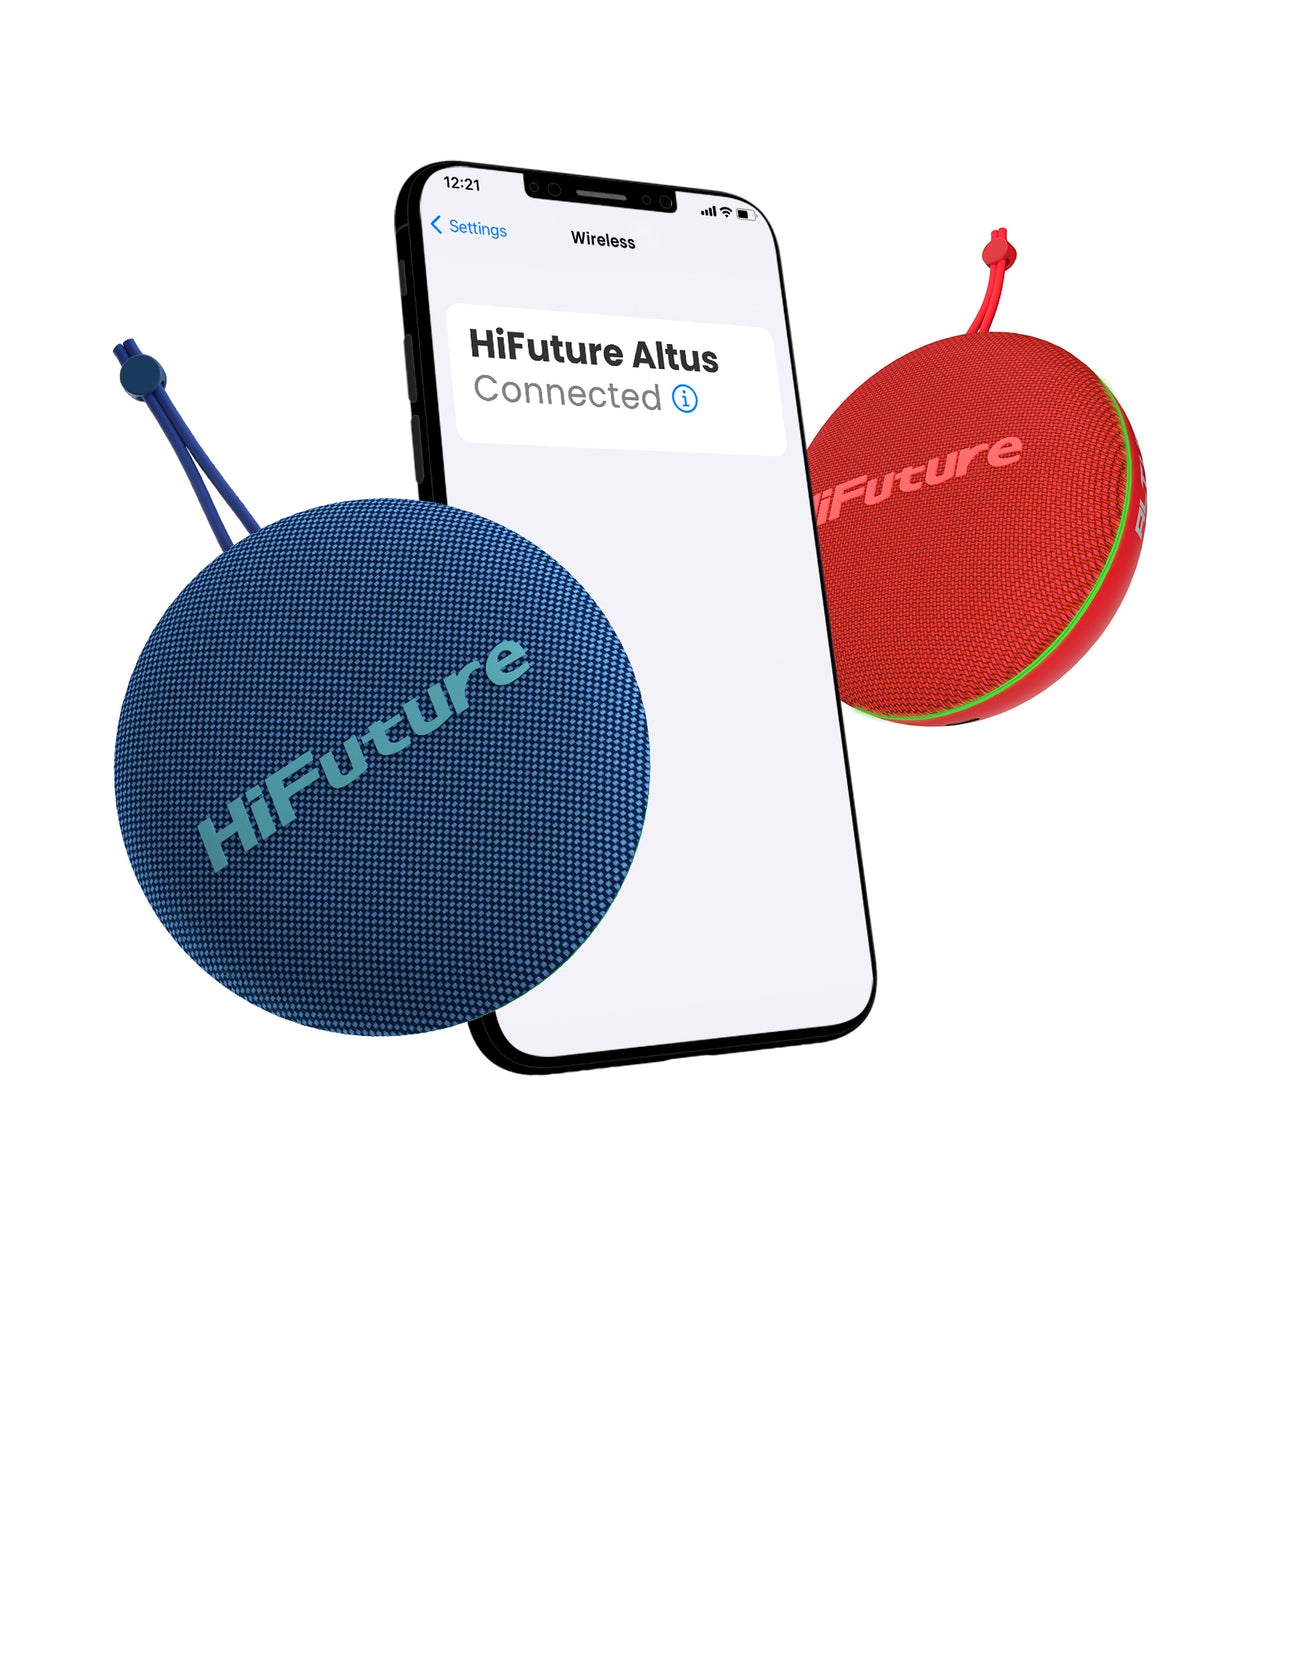 Hifuture Altus connected to phone 